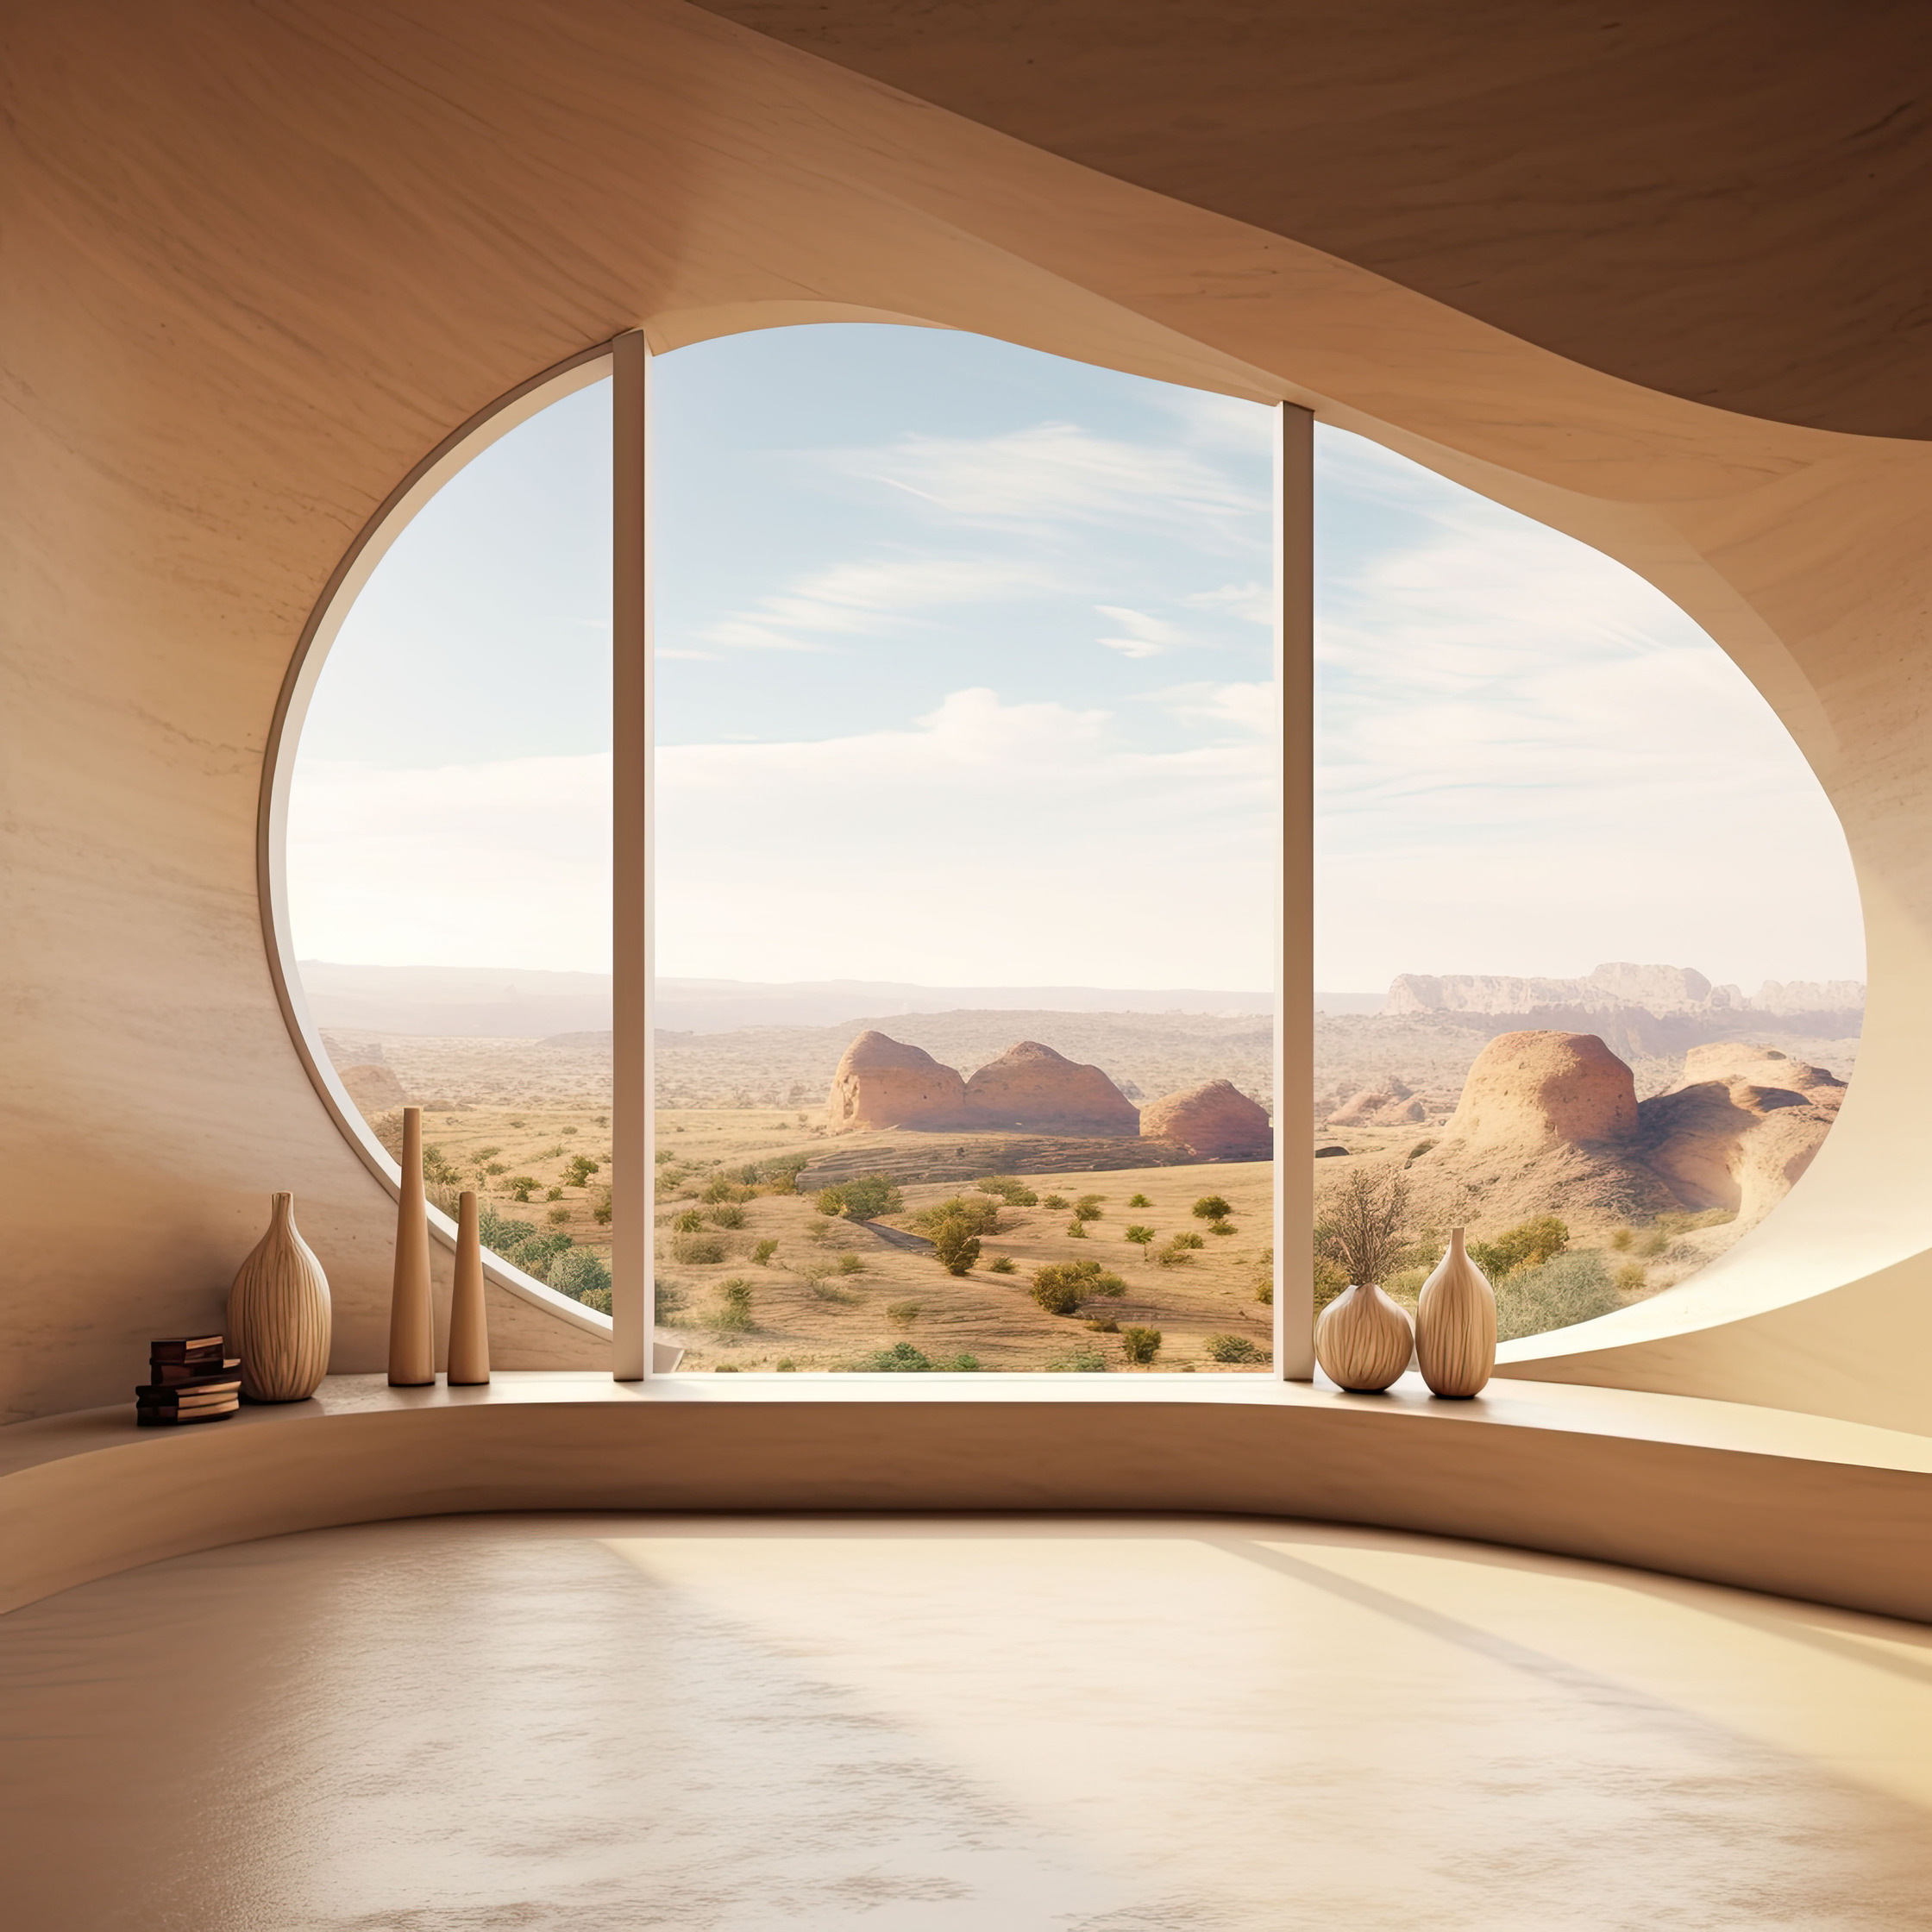 a room with a circular window overlooking a desert